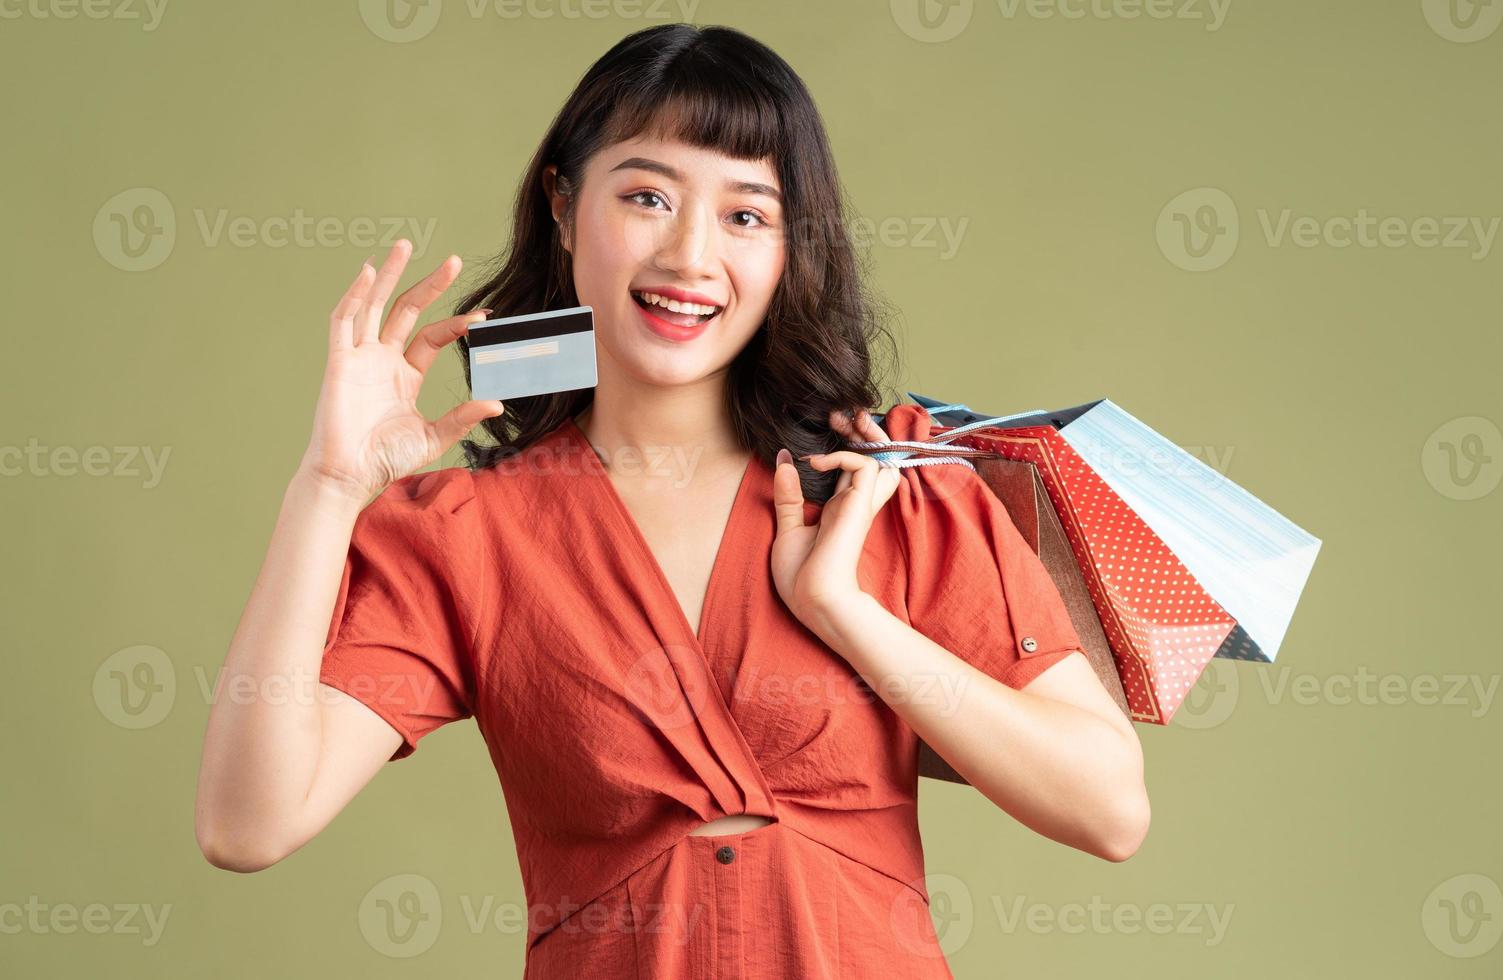 Asian woman holding shopping bag and holding up a bank card photo